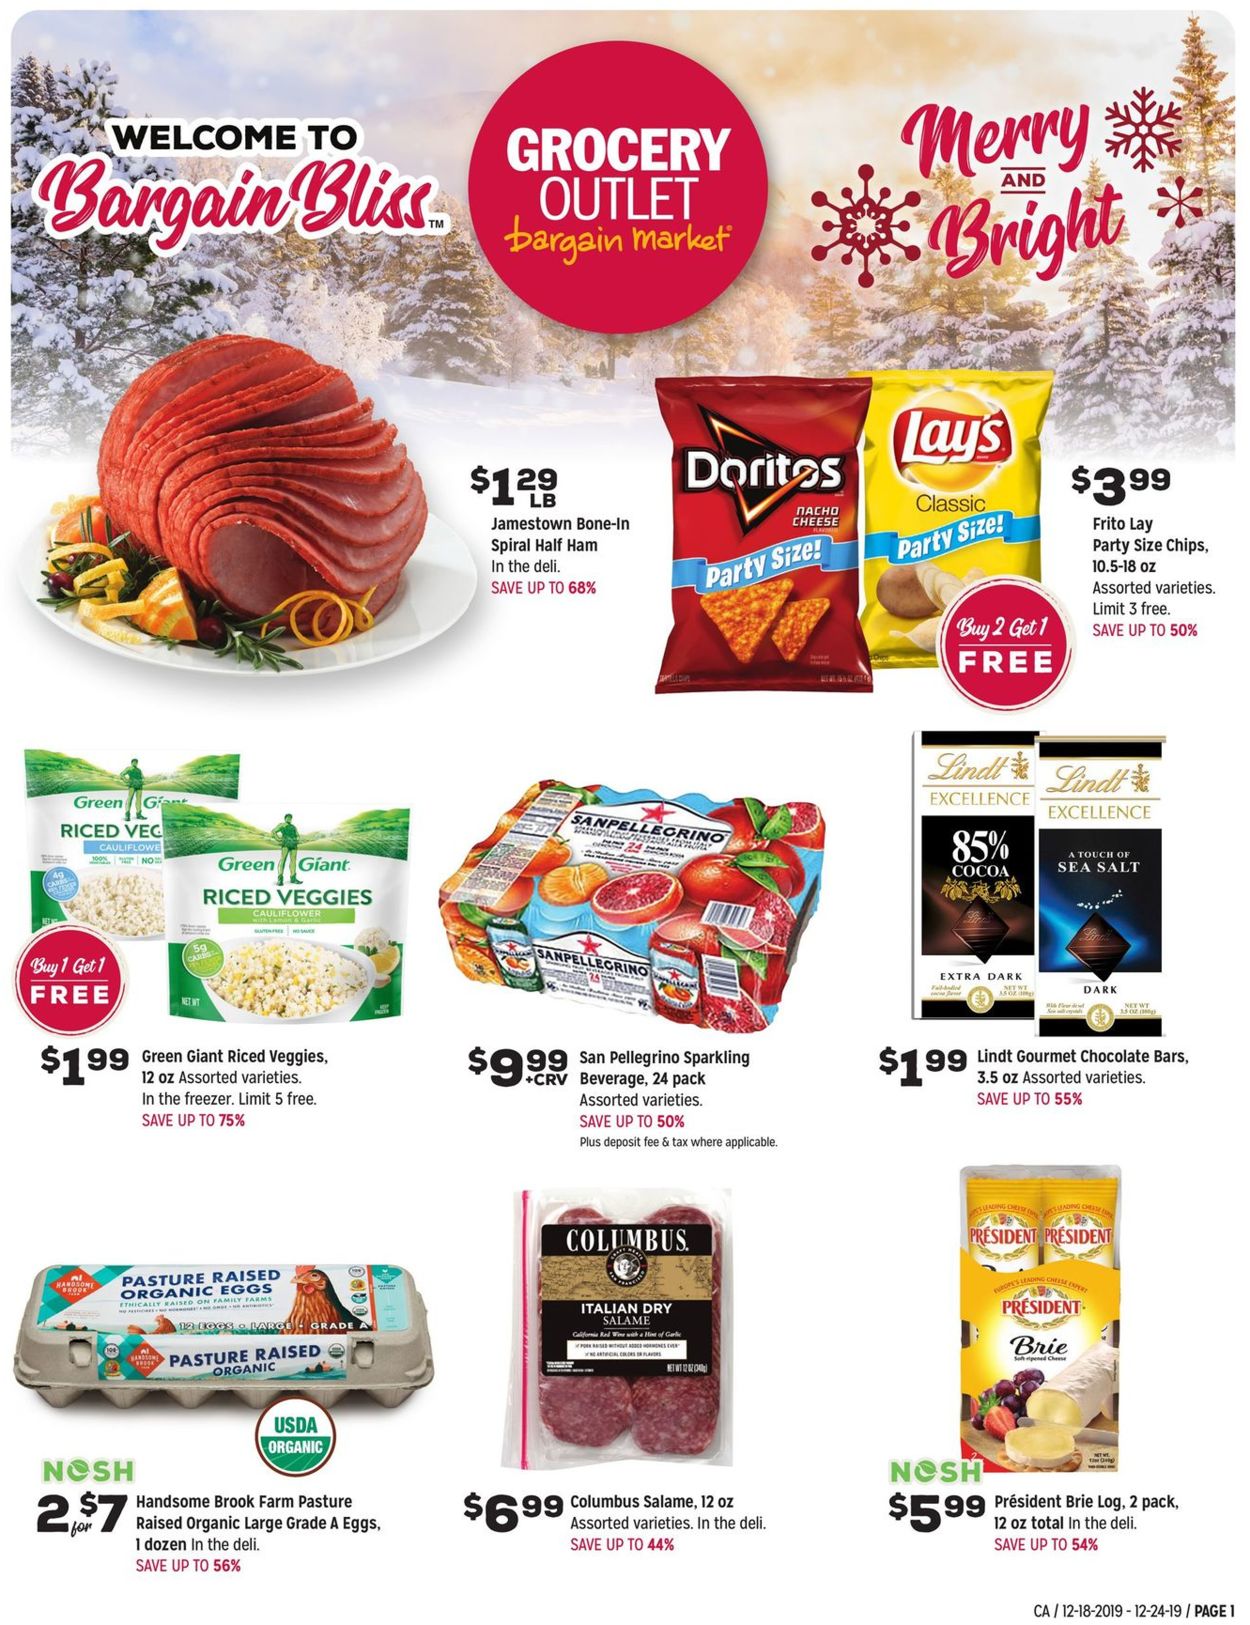 Grocery Outlet - Holiday Ad 2019 Current weekly ad 12/18 ...